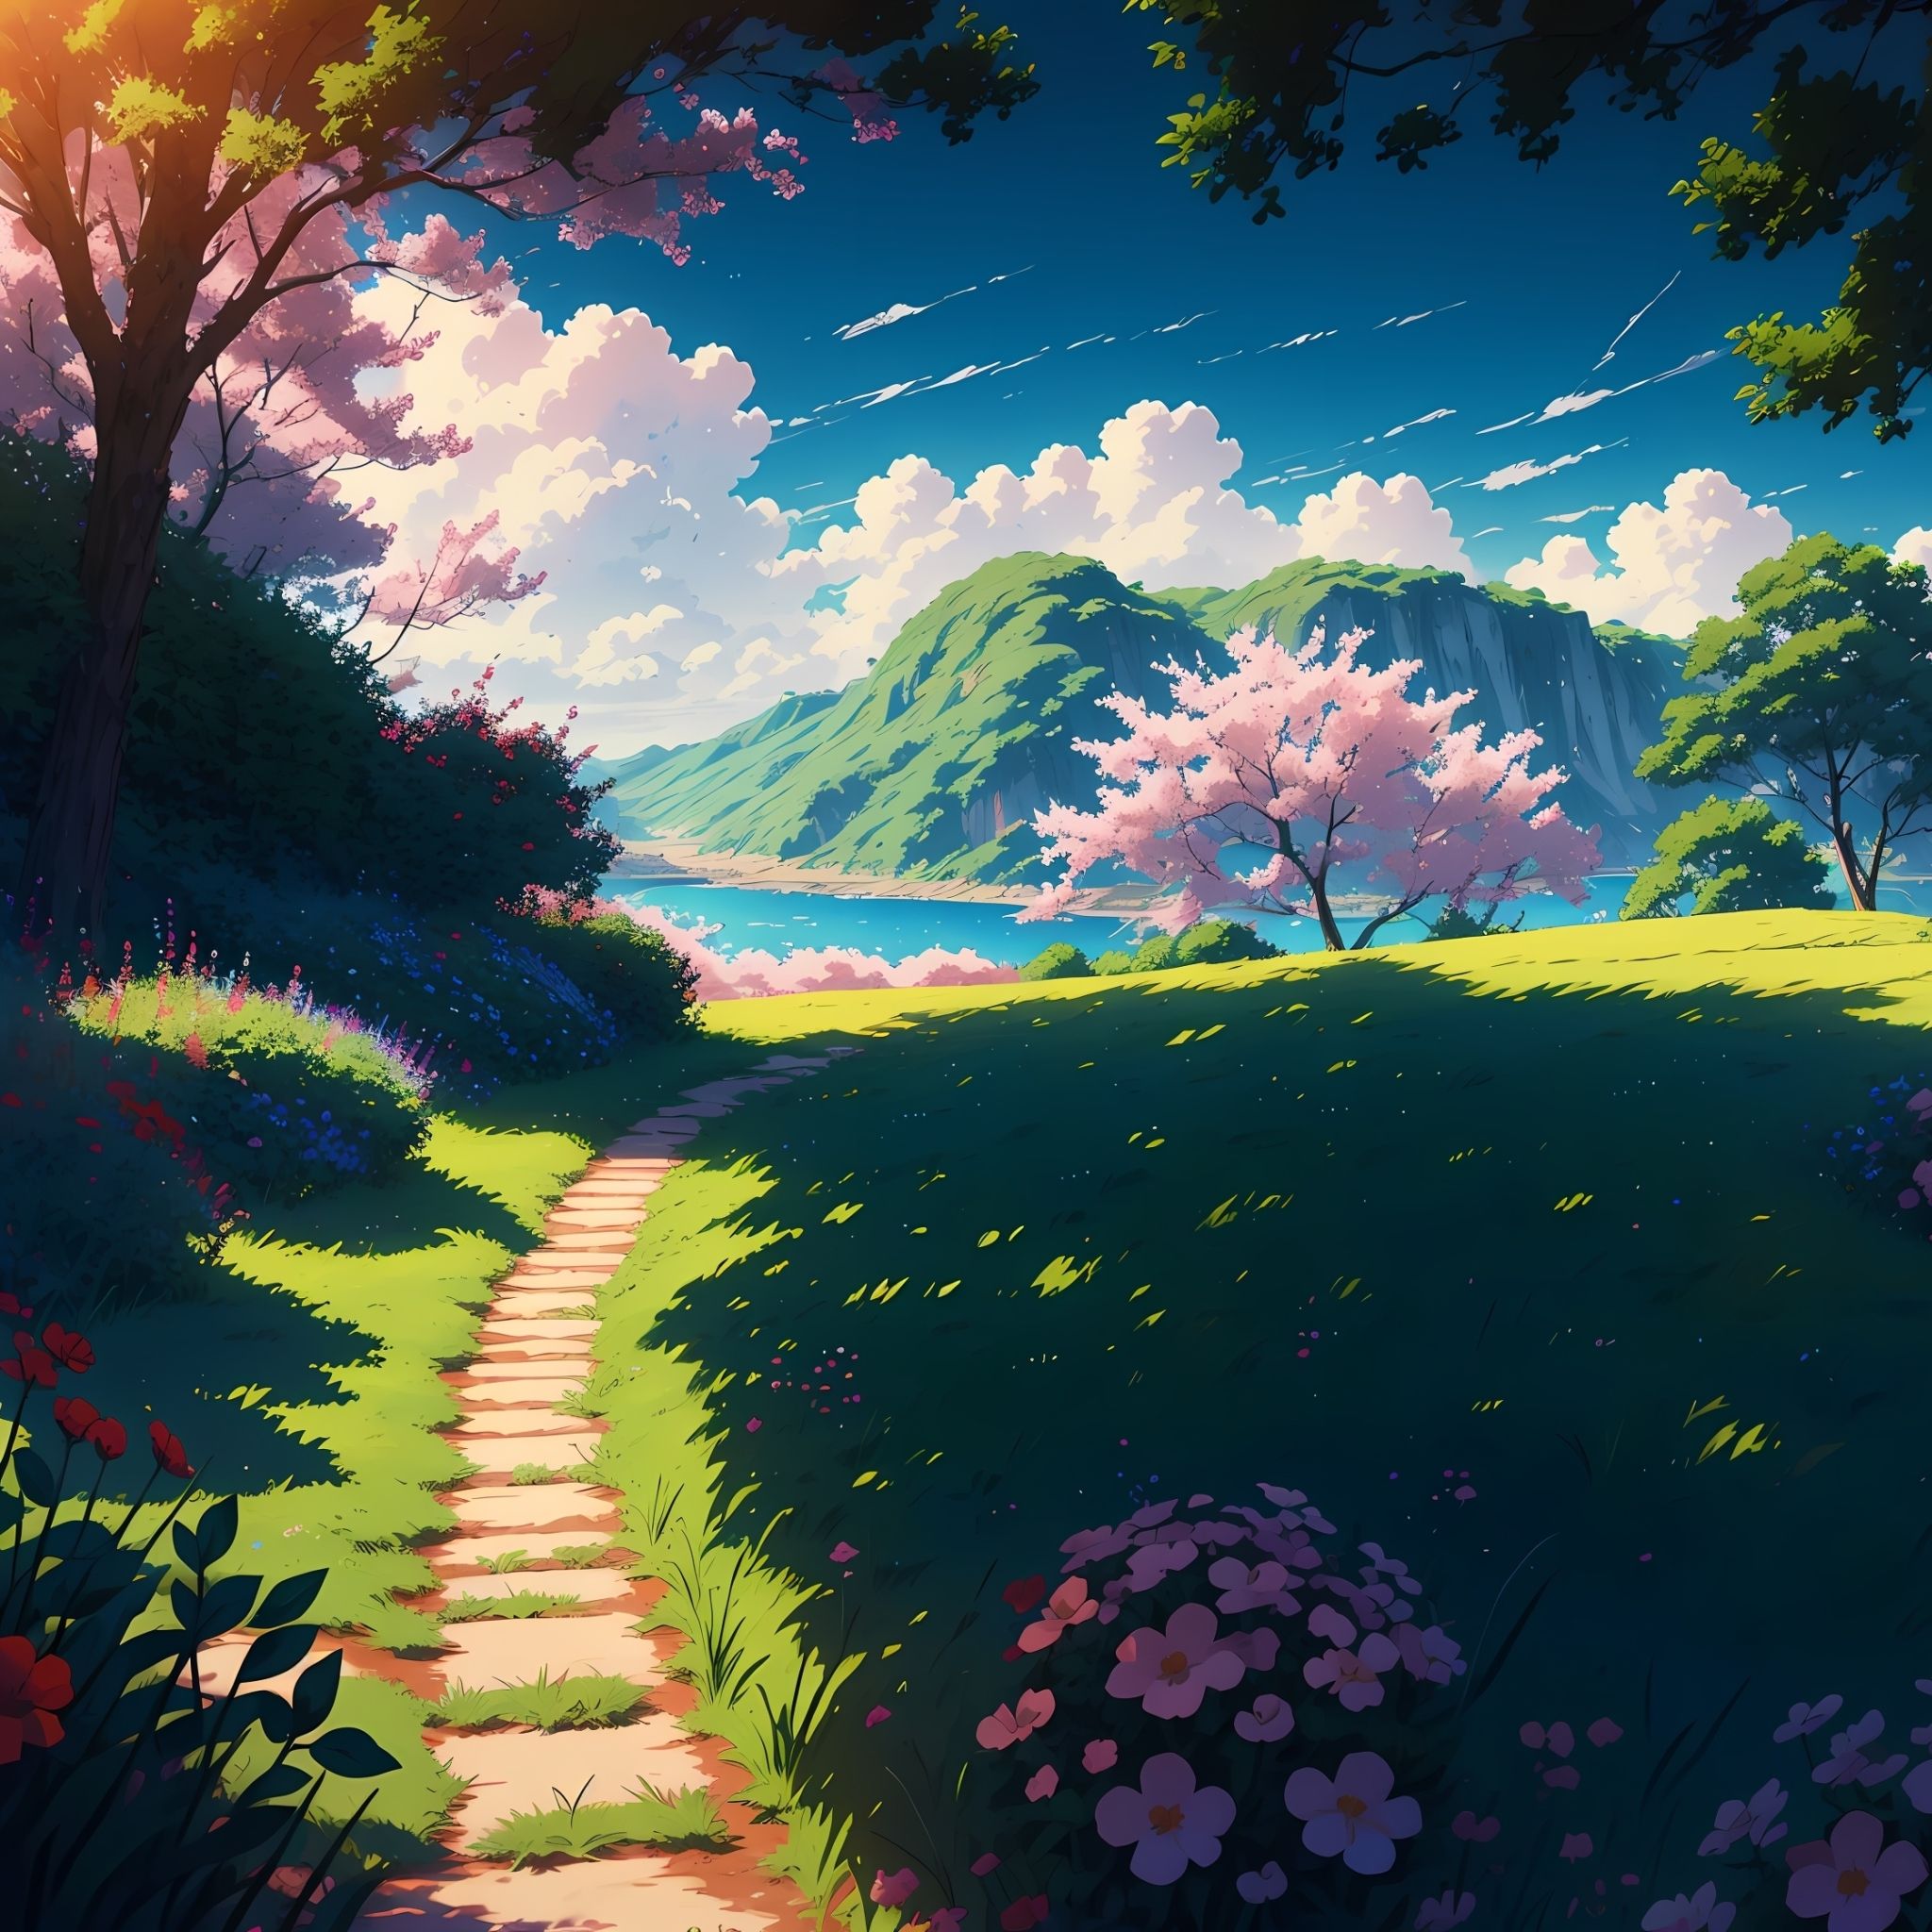 A anime style landscape with a stone pathway through a flower meadow, trees and mountains in the background - Anime landscape